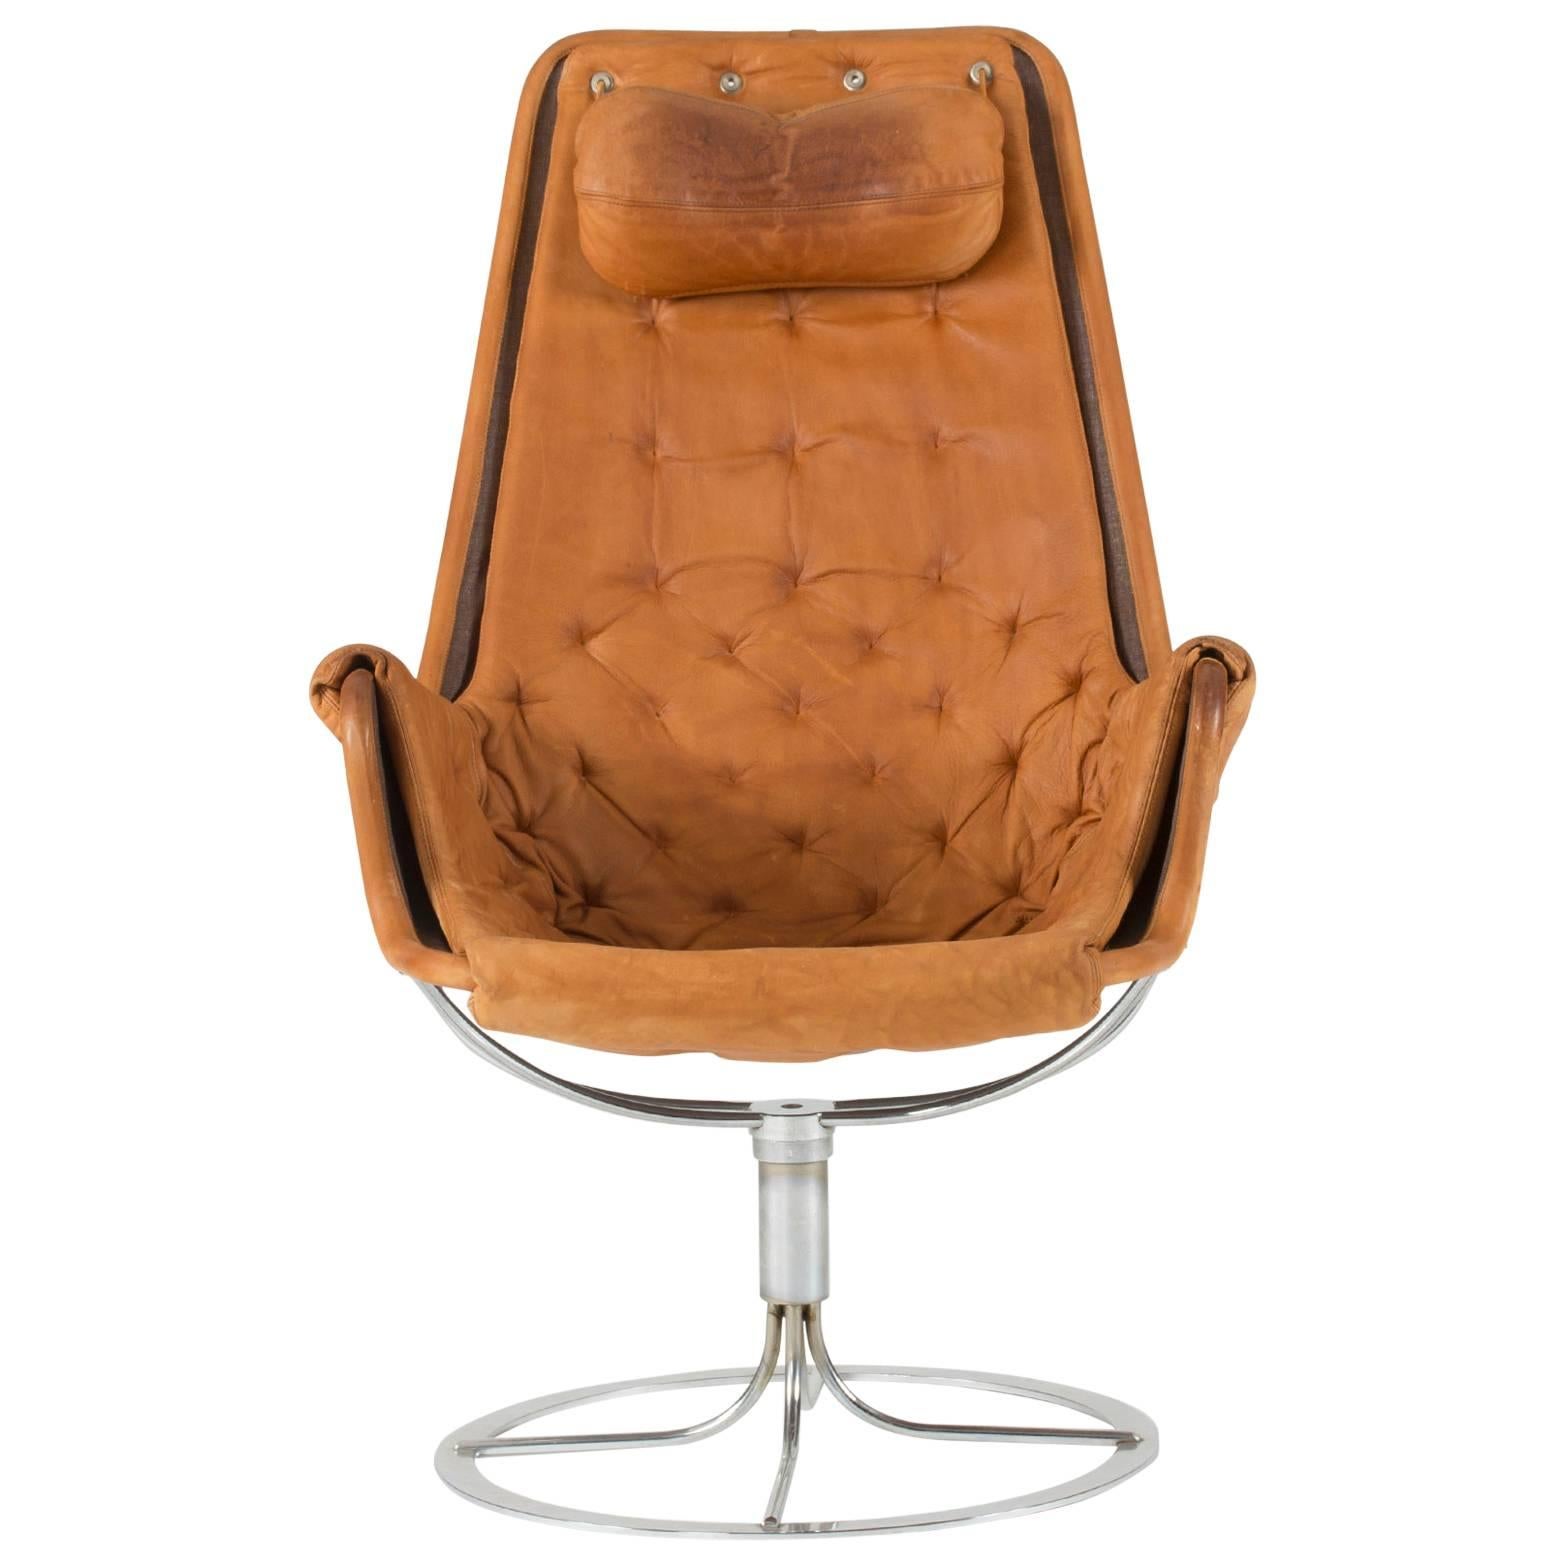 Cognac Leather "Jetson" by Bruno Mathsson